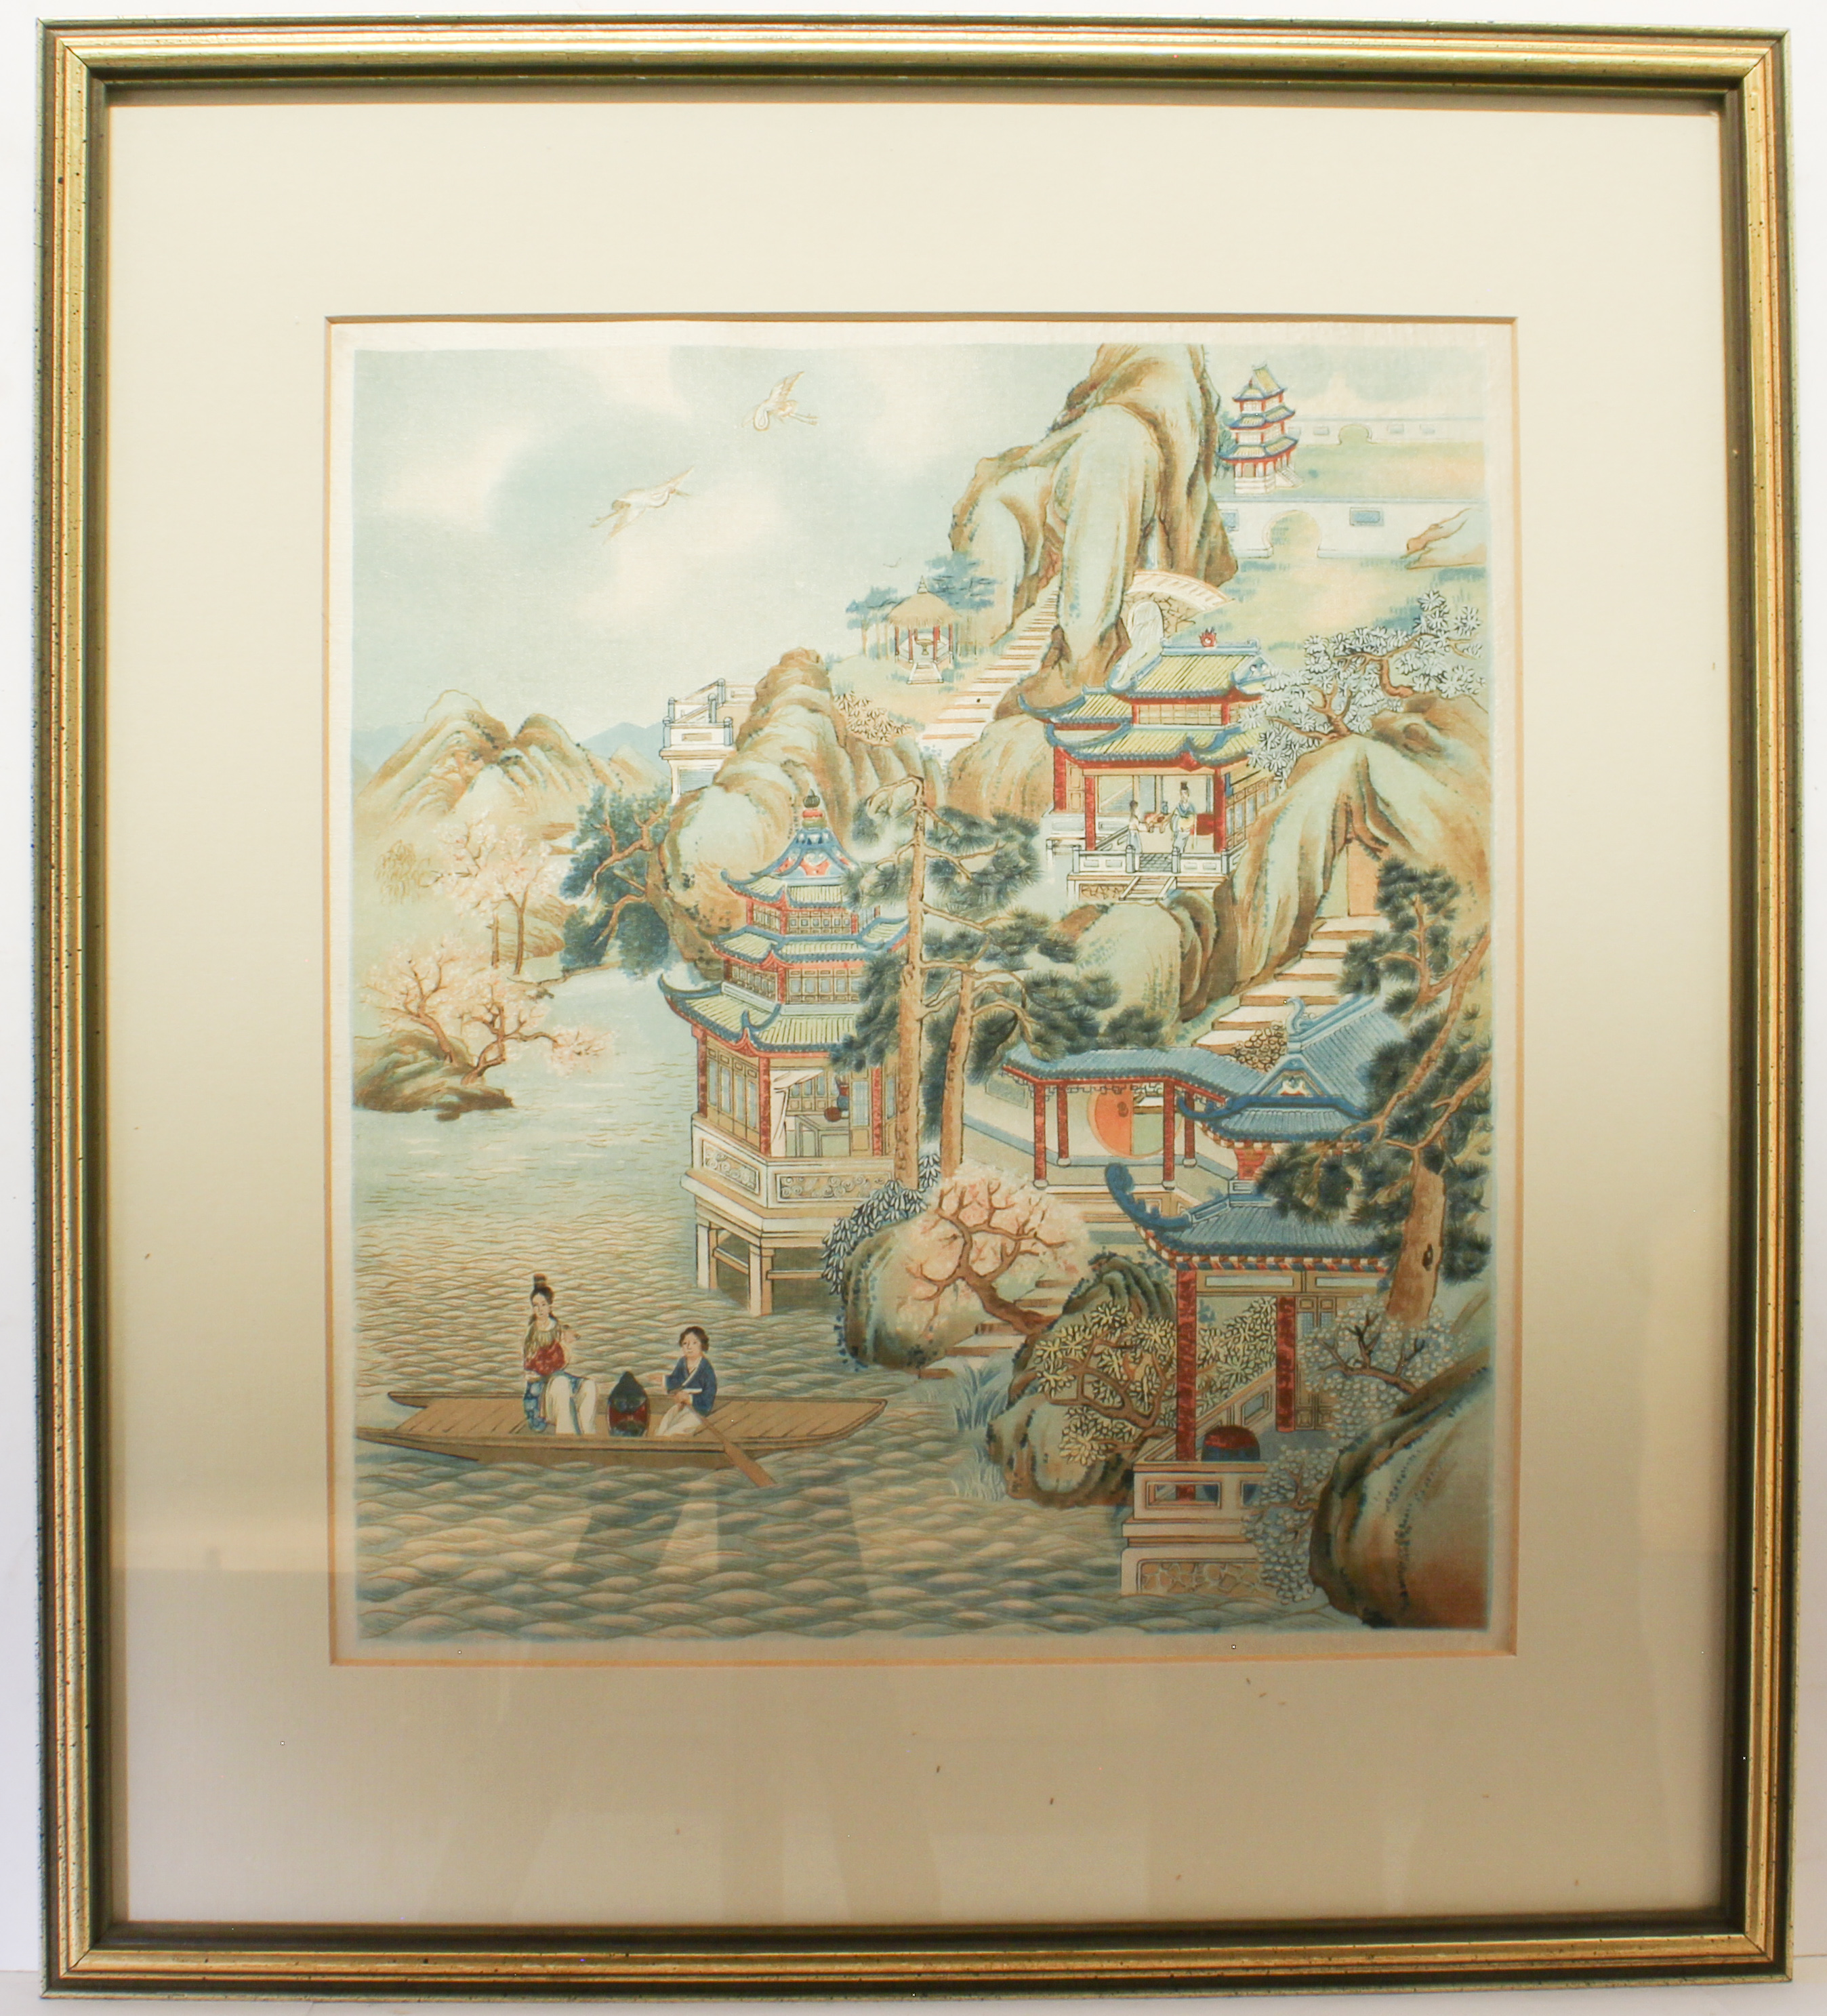 Three Japanese woodblock prints - 20th century after originals by Ando Hiroshige, framed and glazed, - Image 5 of 5